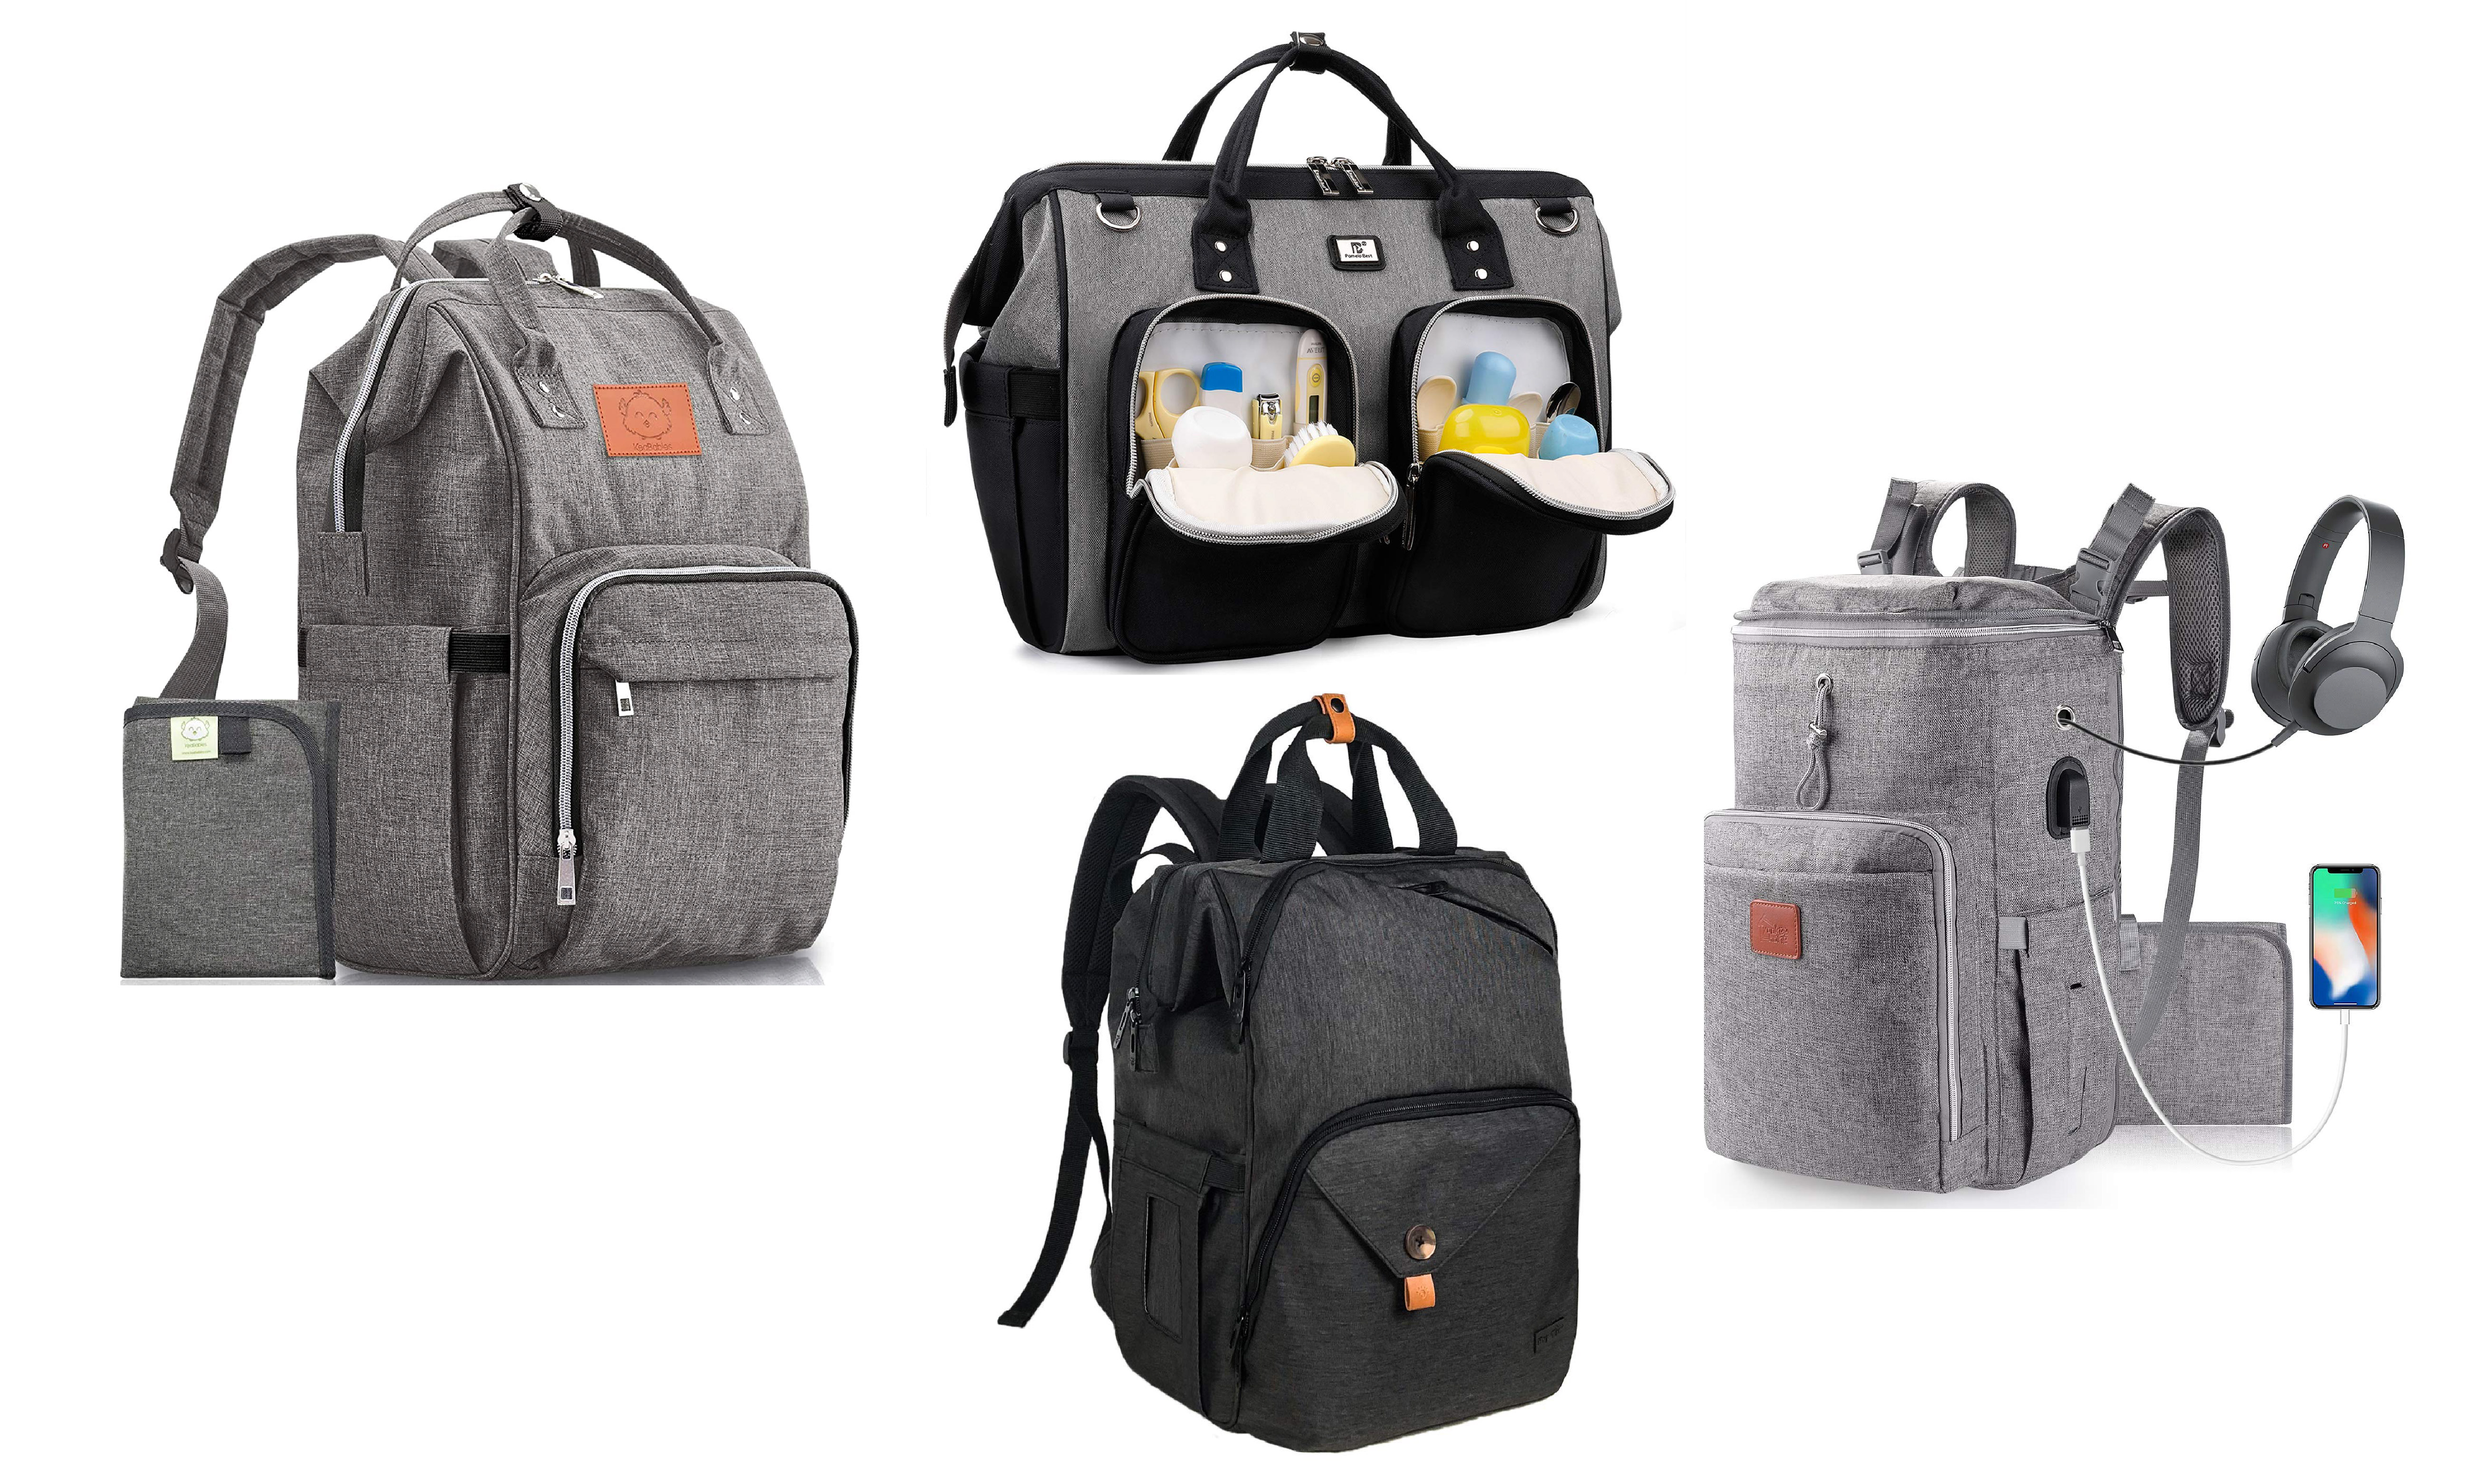 Baby Diaper Bag Backpack With Changing Station - Dual-use Baby Bag